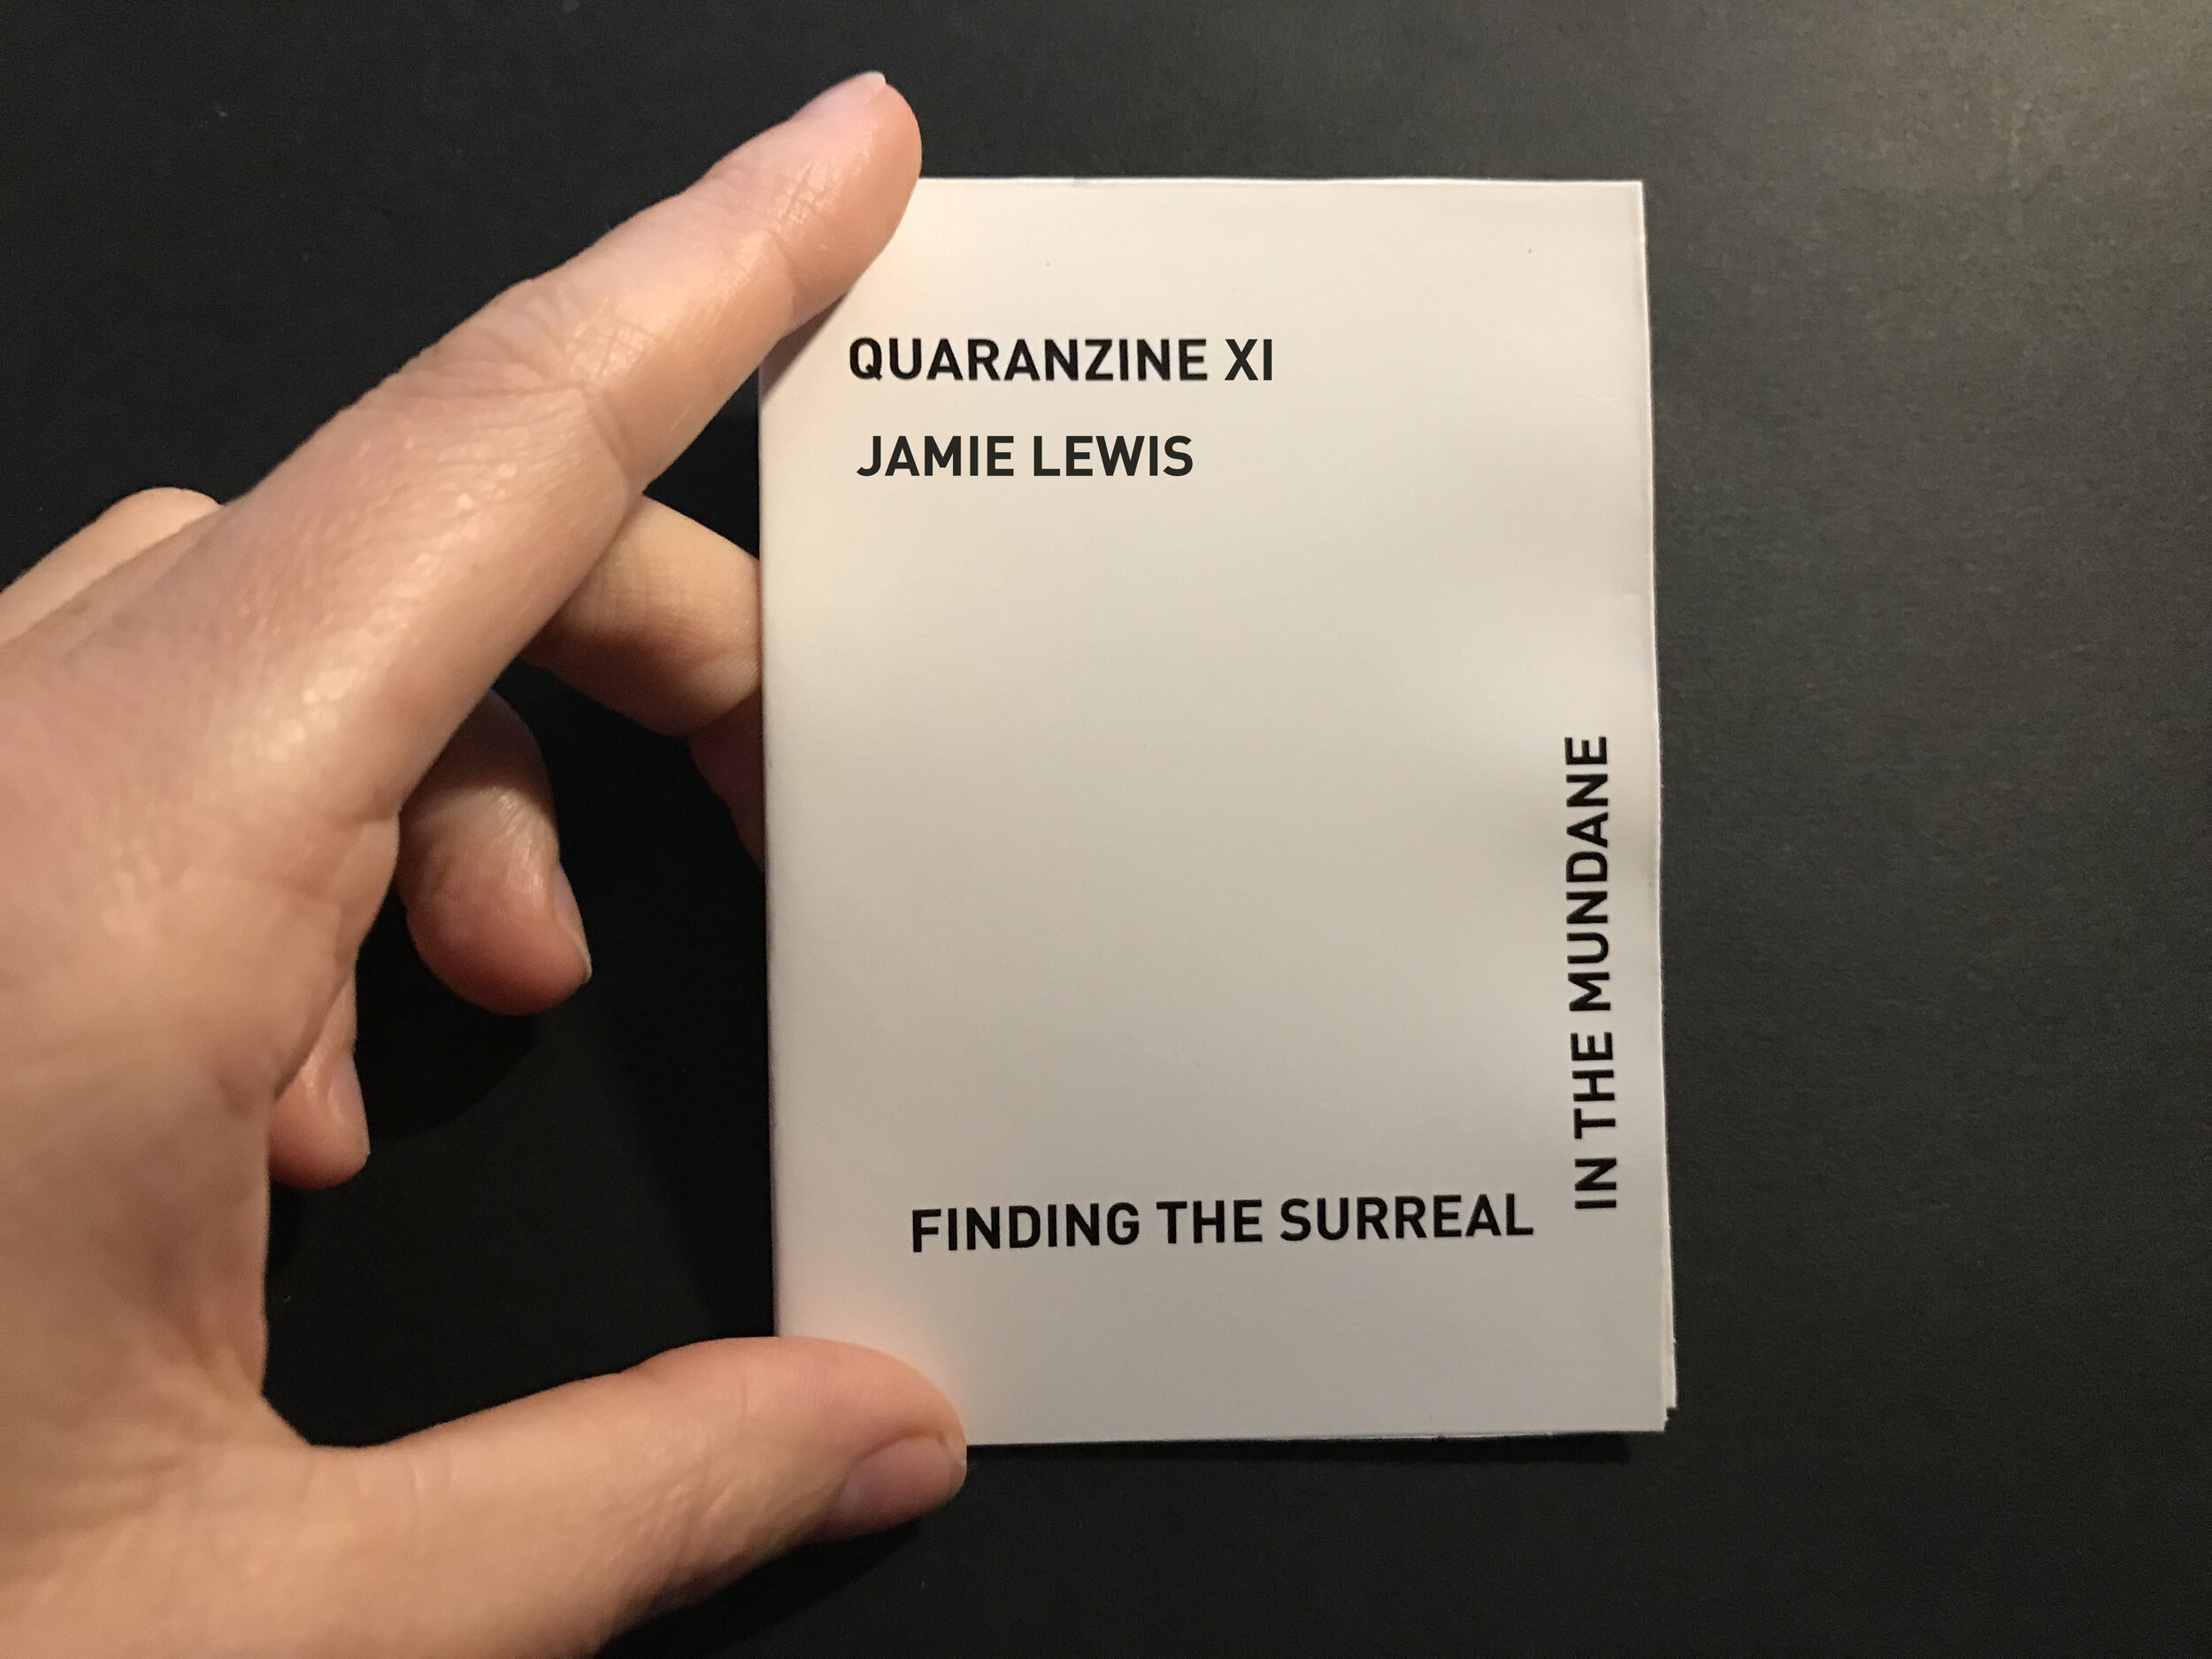 photo of hand holding zine: black text in L shape